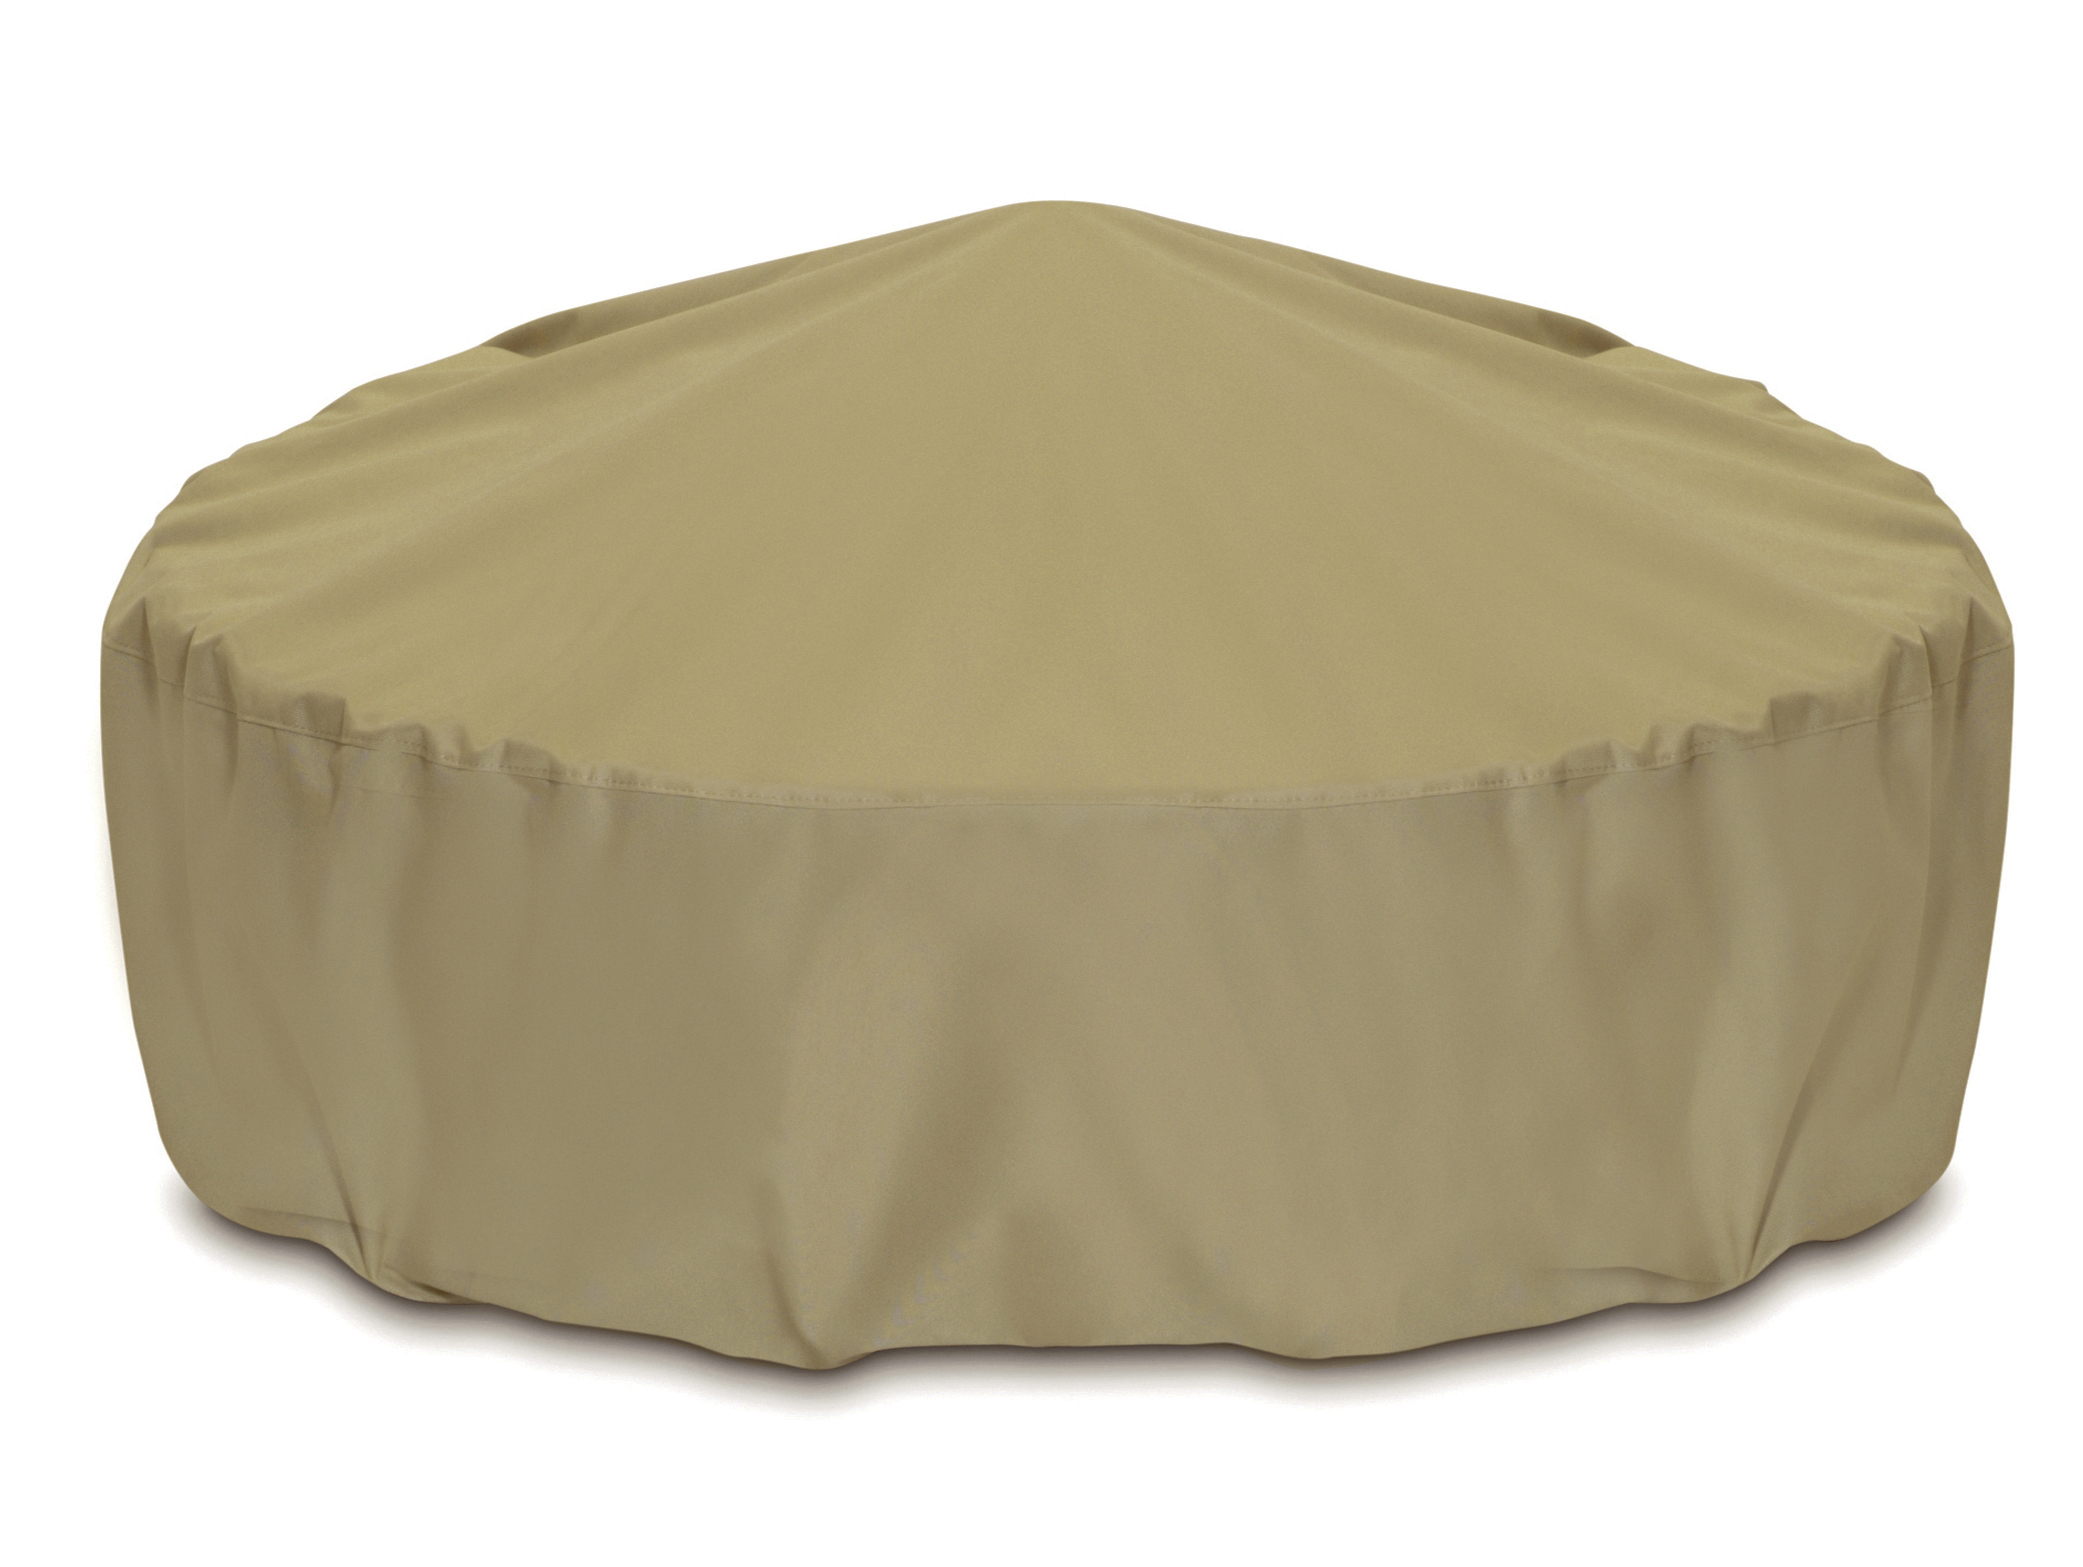 Two Dogs Designs 80 Fire Pit Cover, Khaki   Outdoor Living   Patio